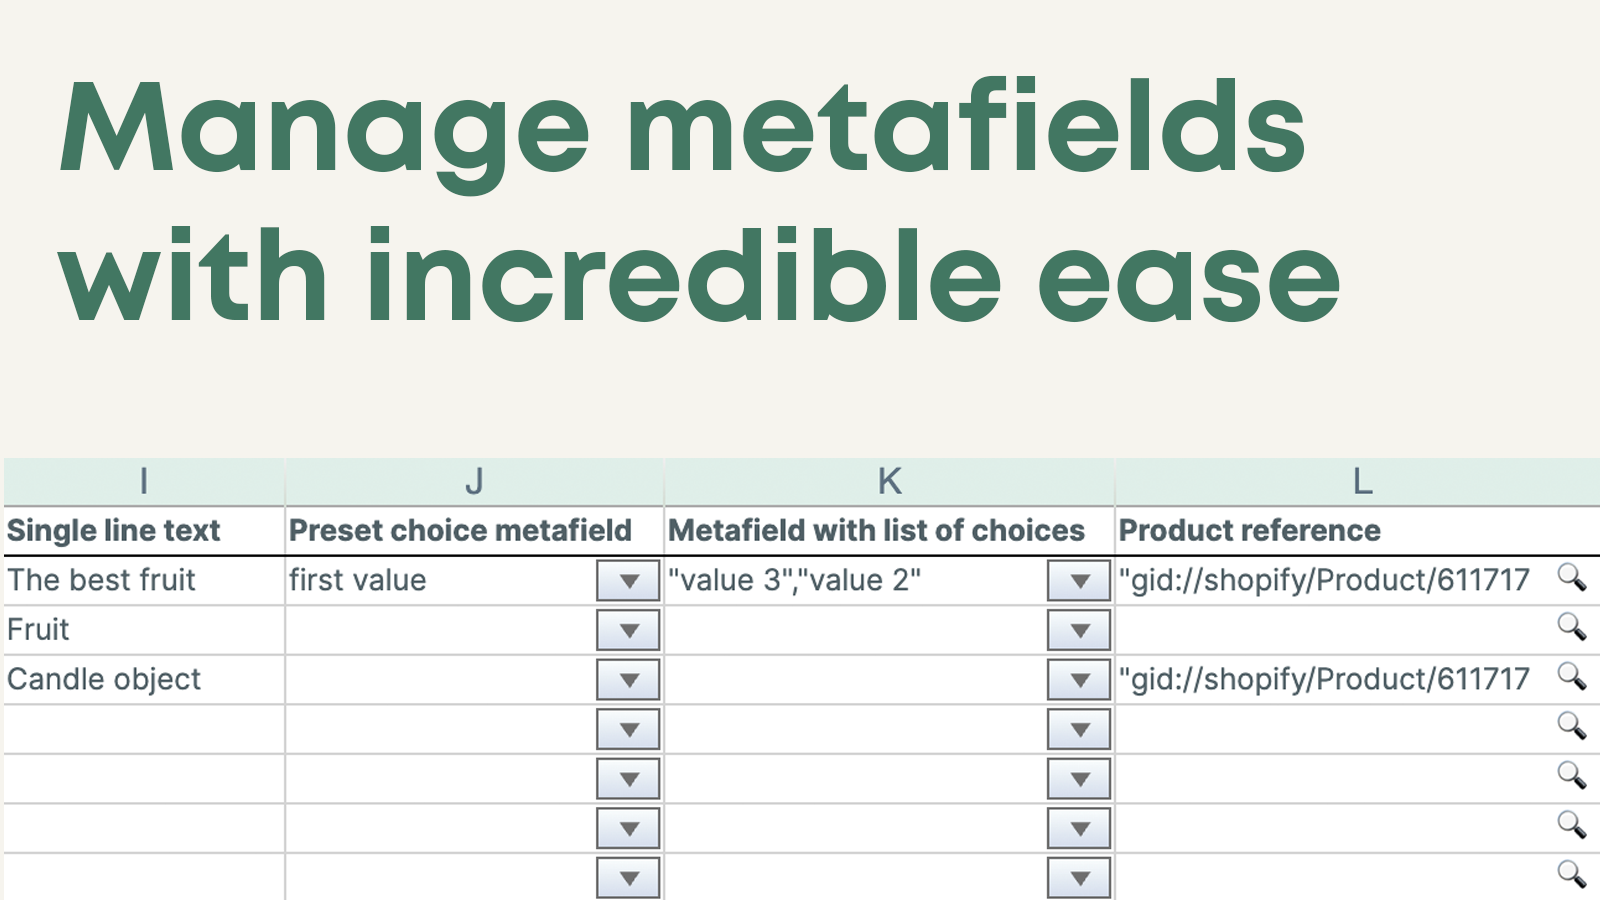 Manage metafields with incredible ease